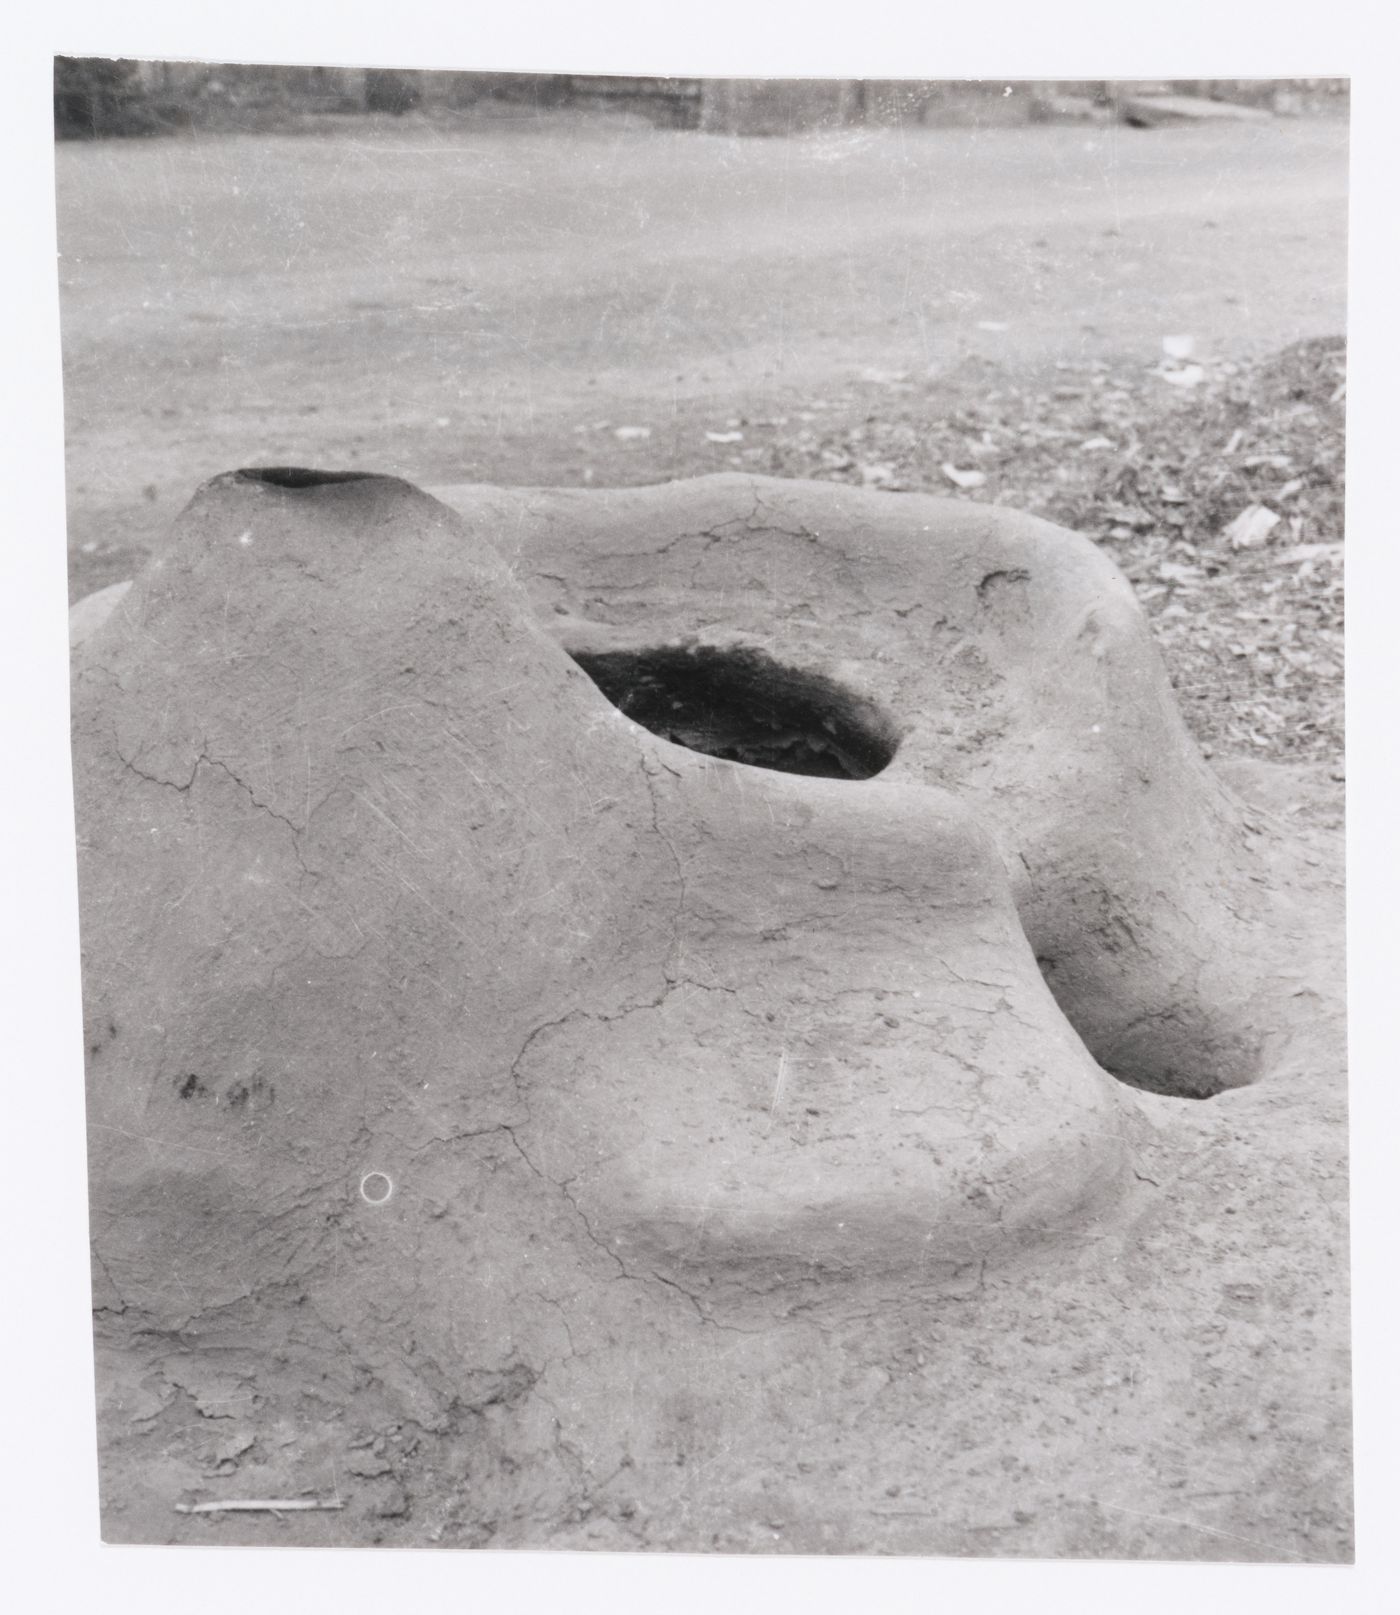 Earth construction in Chandigarh's area before the construction, India